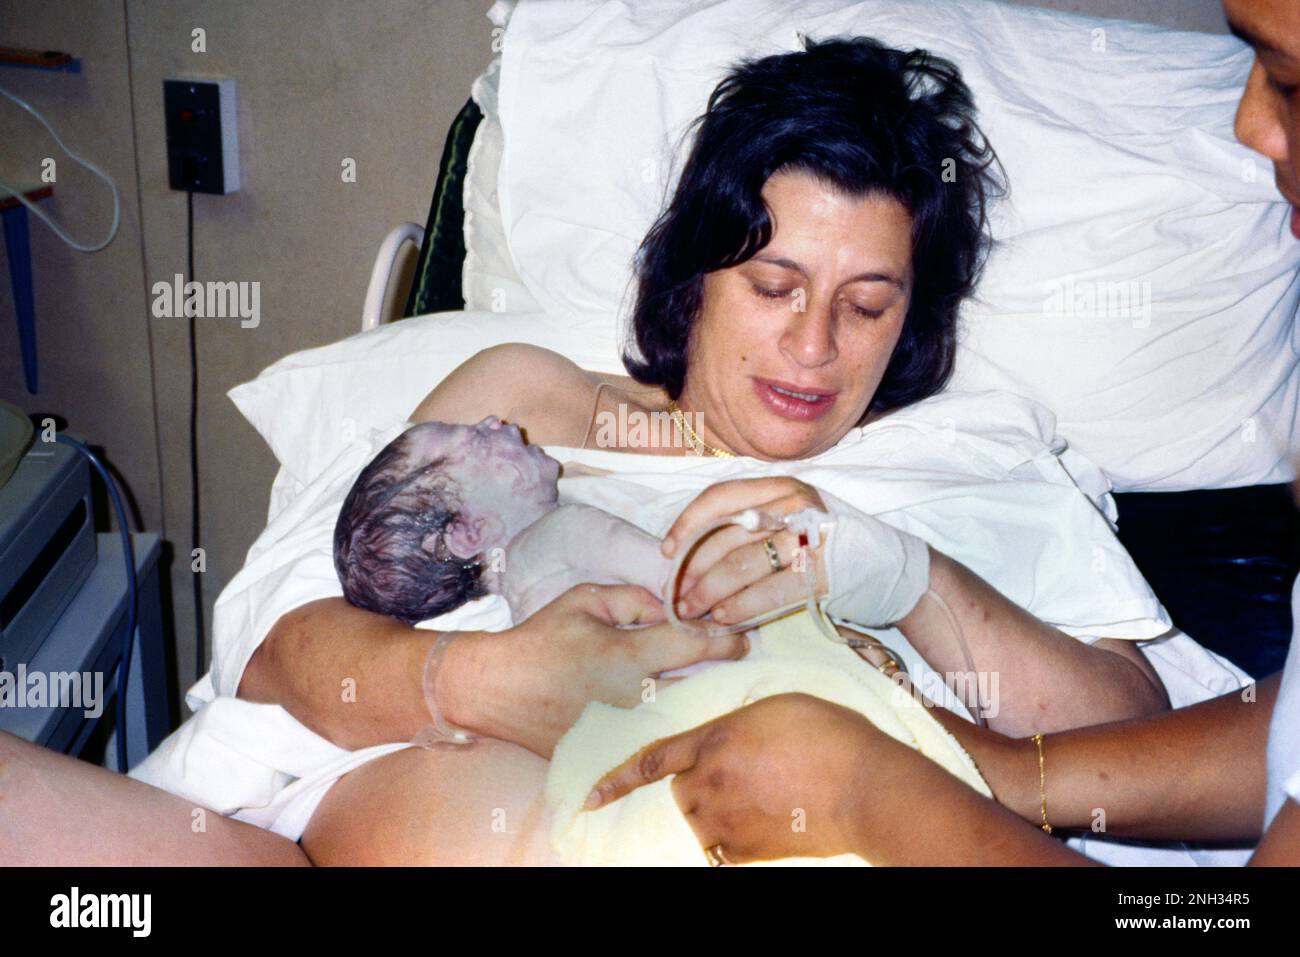 New Born Baby & Mother Baby Covered In Vernix Caseosa Natural Occurring Biofilm Surrey England Stock Photo